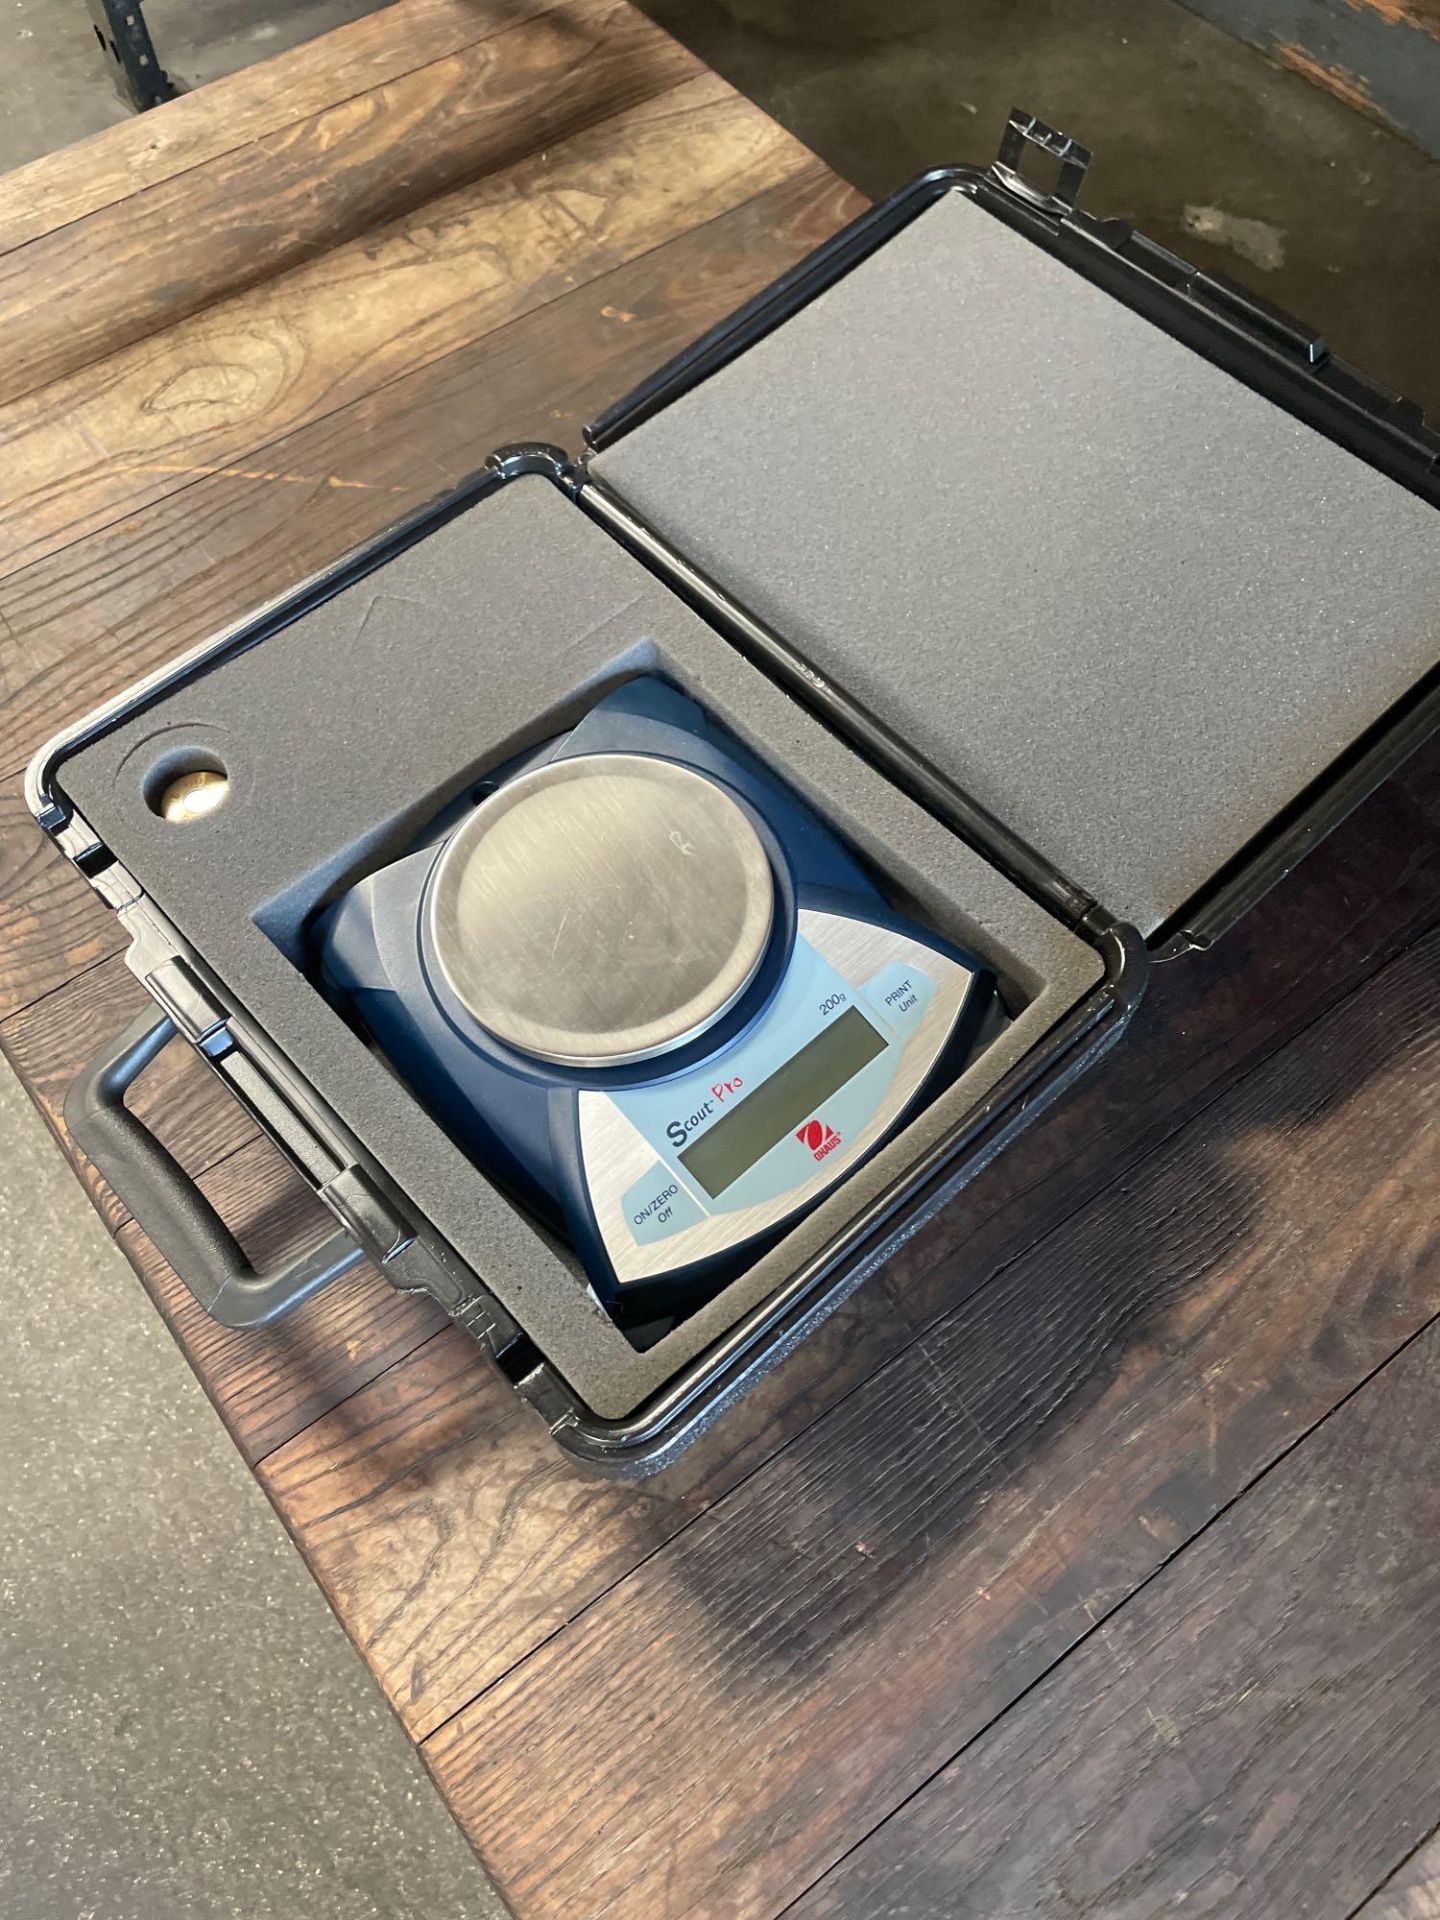 Scout Pro 200 G Digital Scale - Image 3 of 4